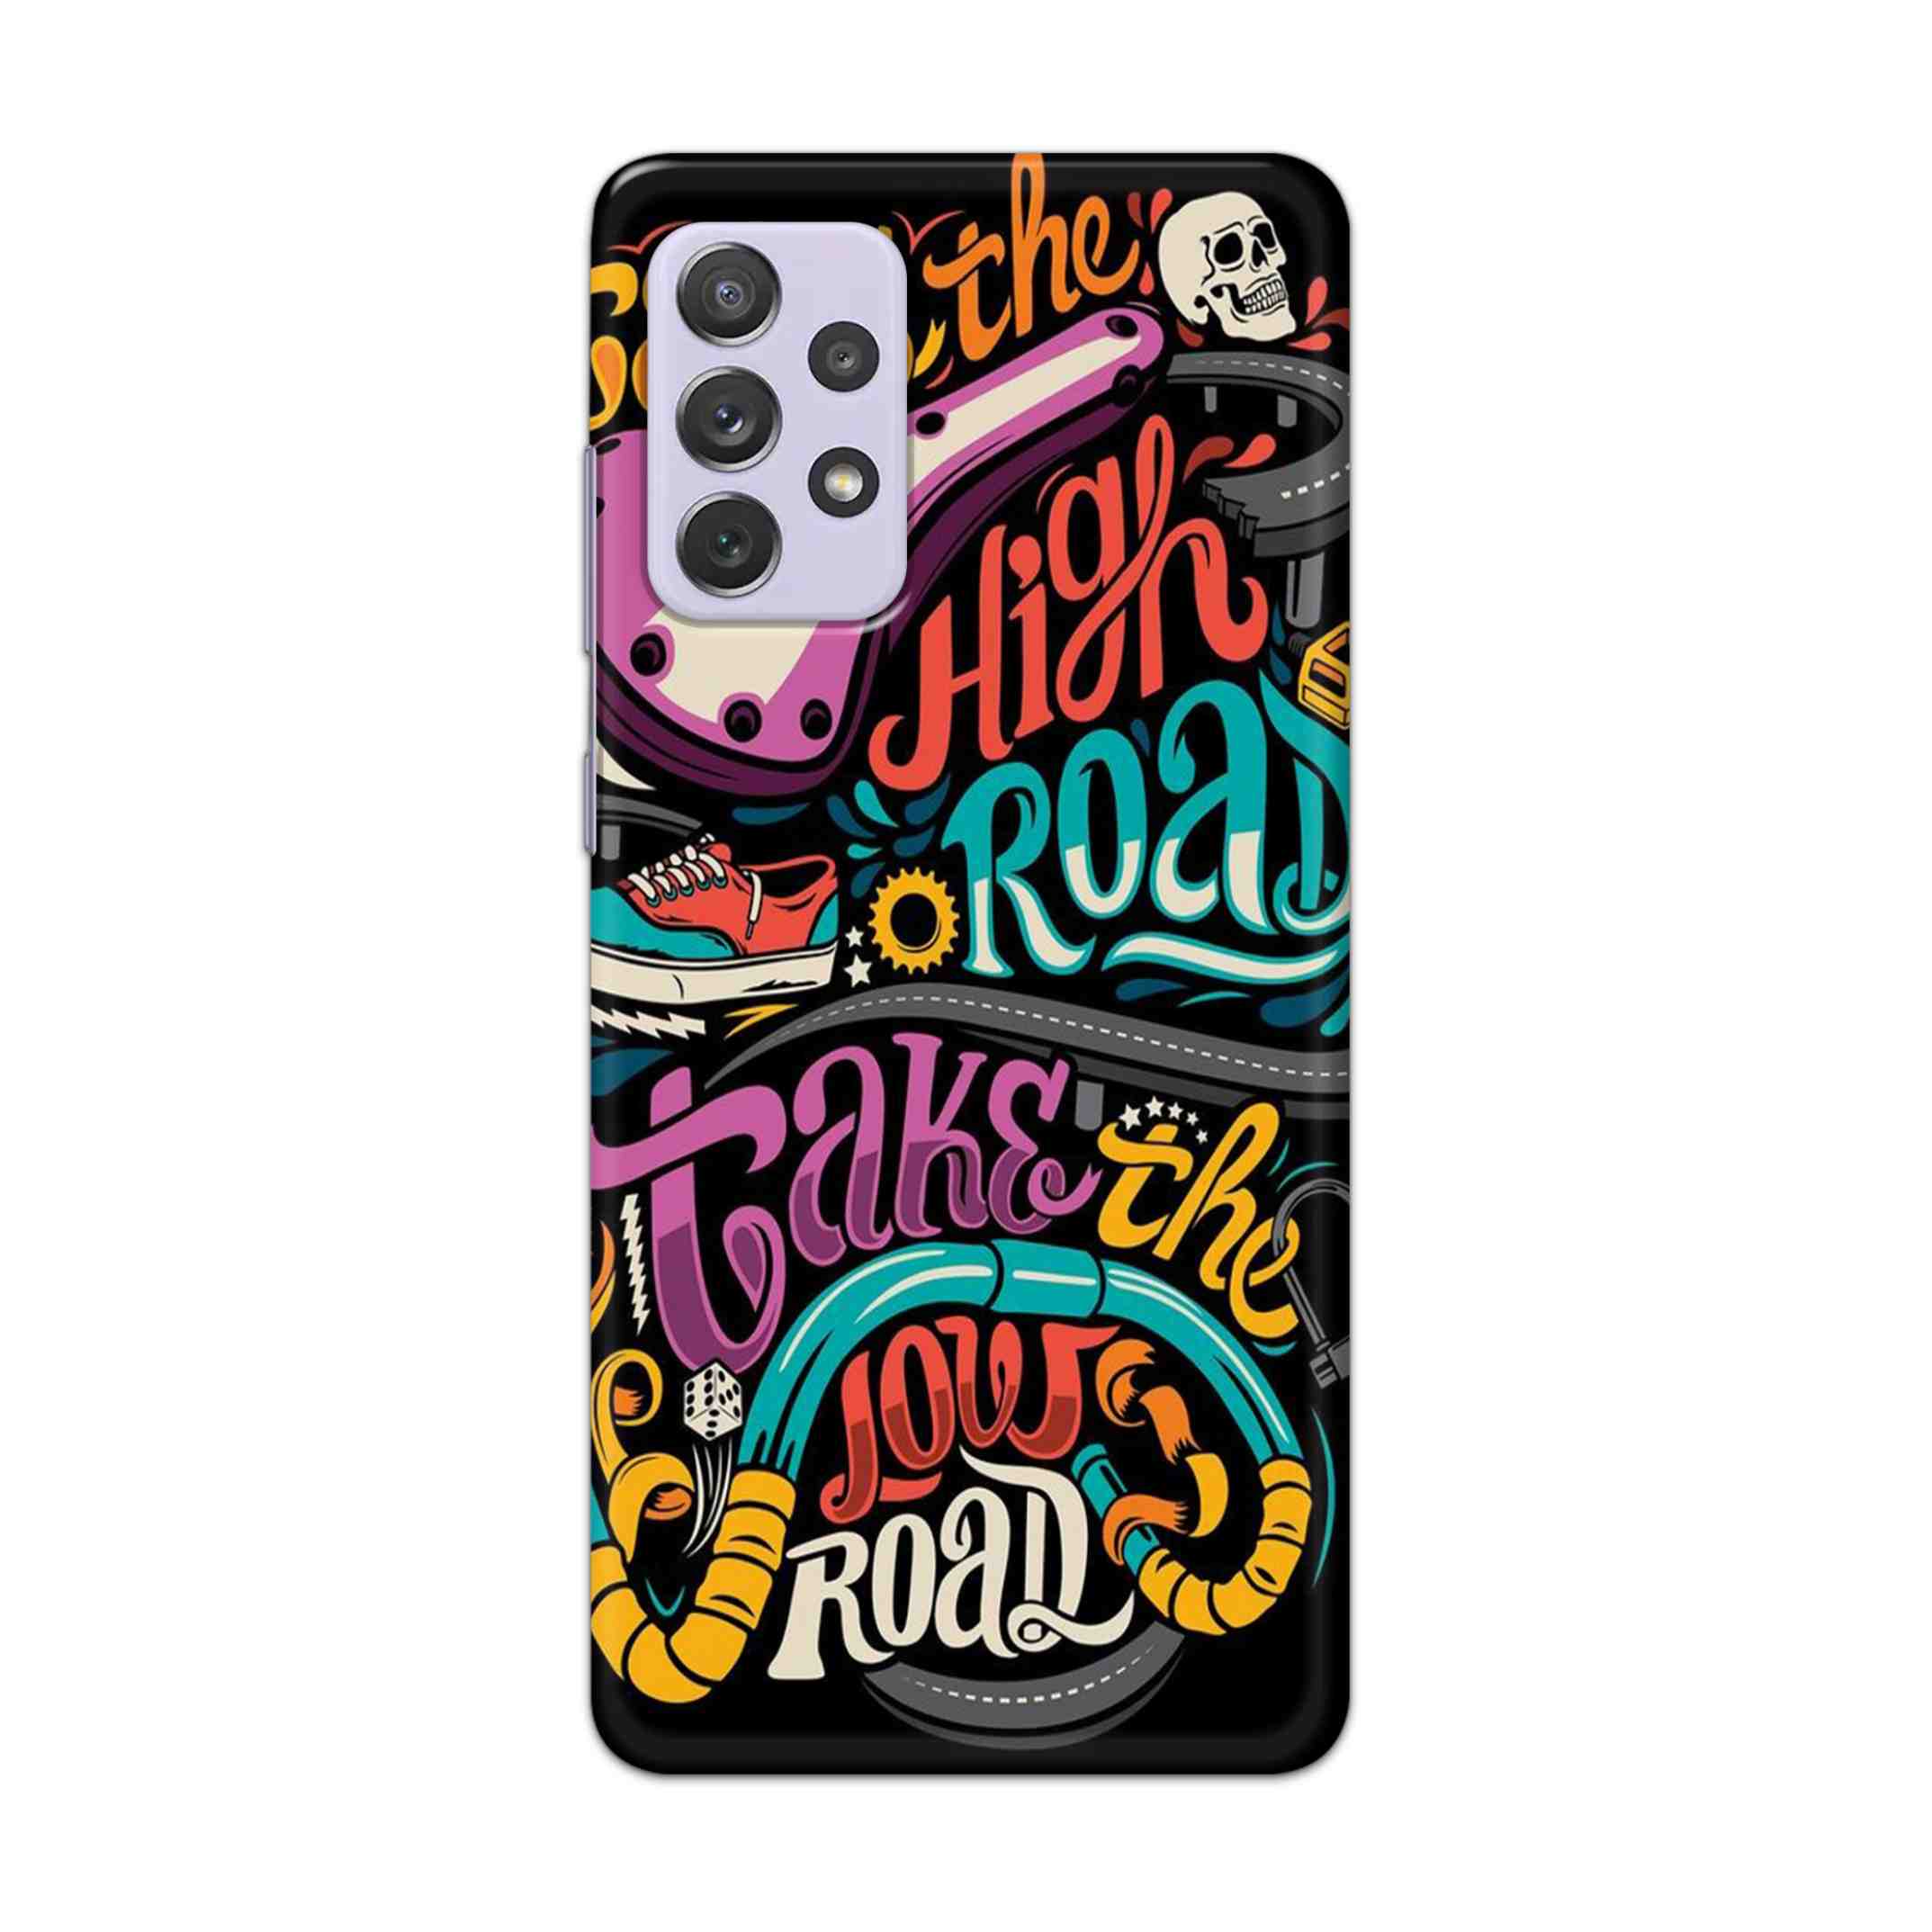 Buy Take The High Road Hard Back Mobile Phone Case Cover For Samsung Galaxy A72 Online